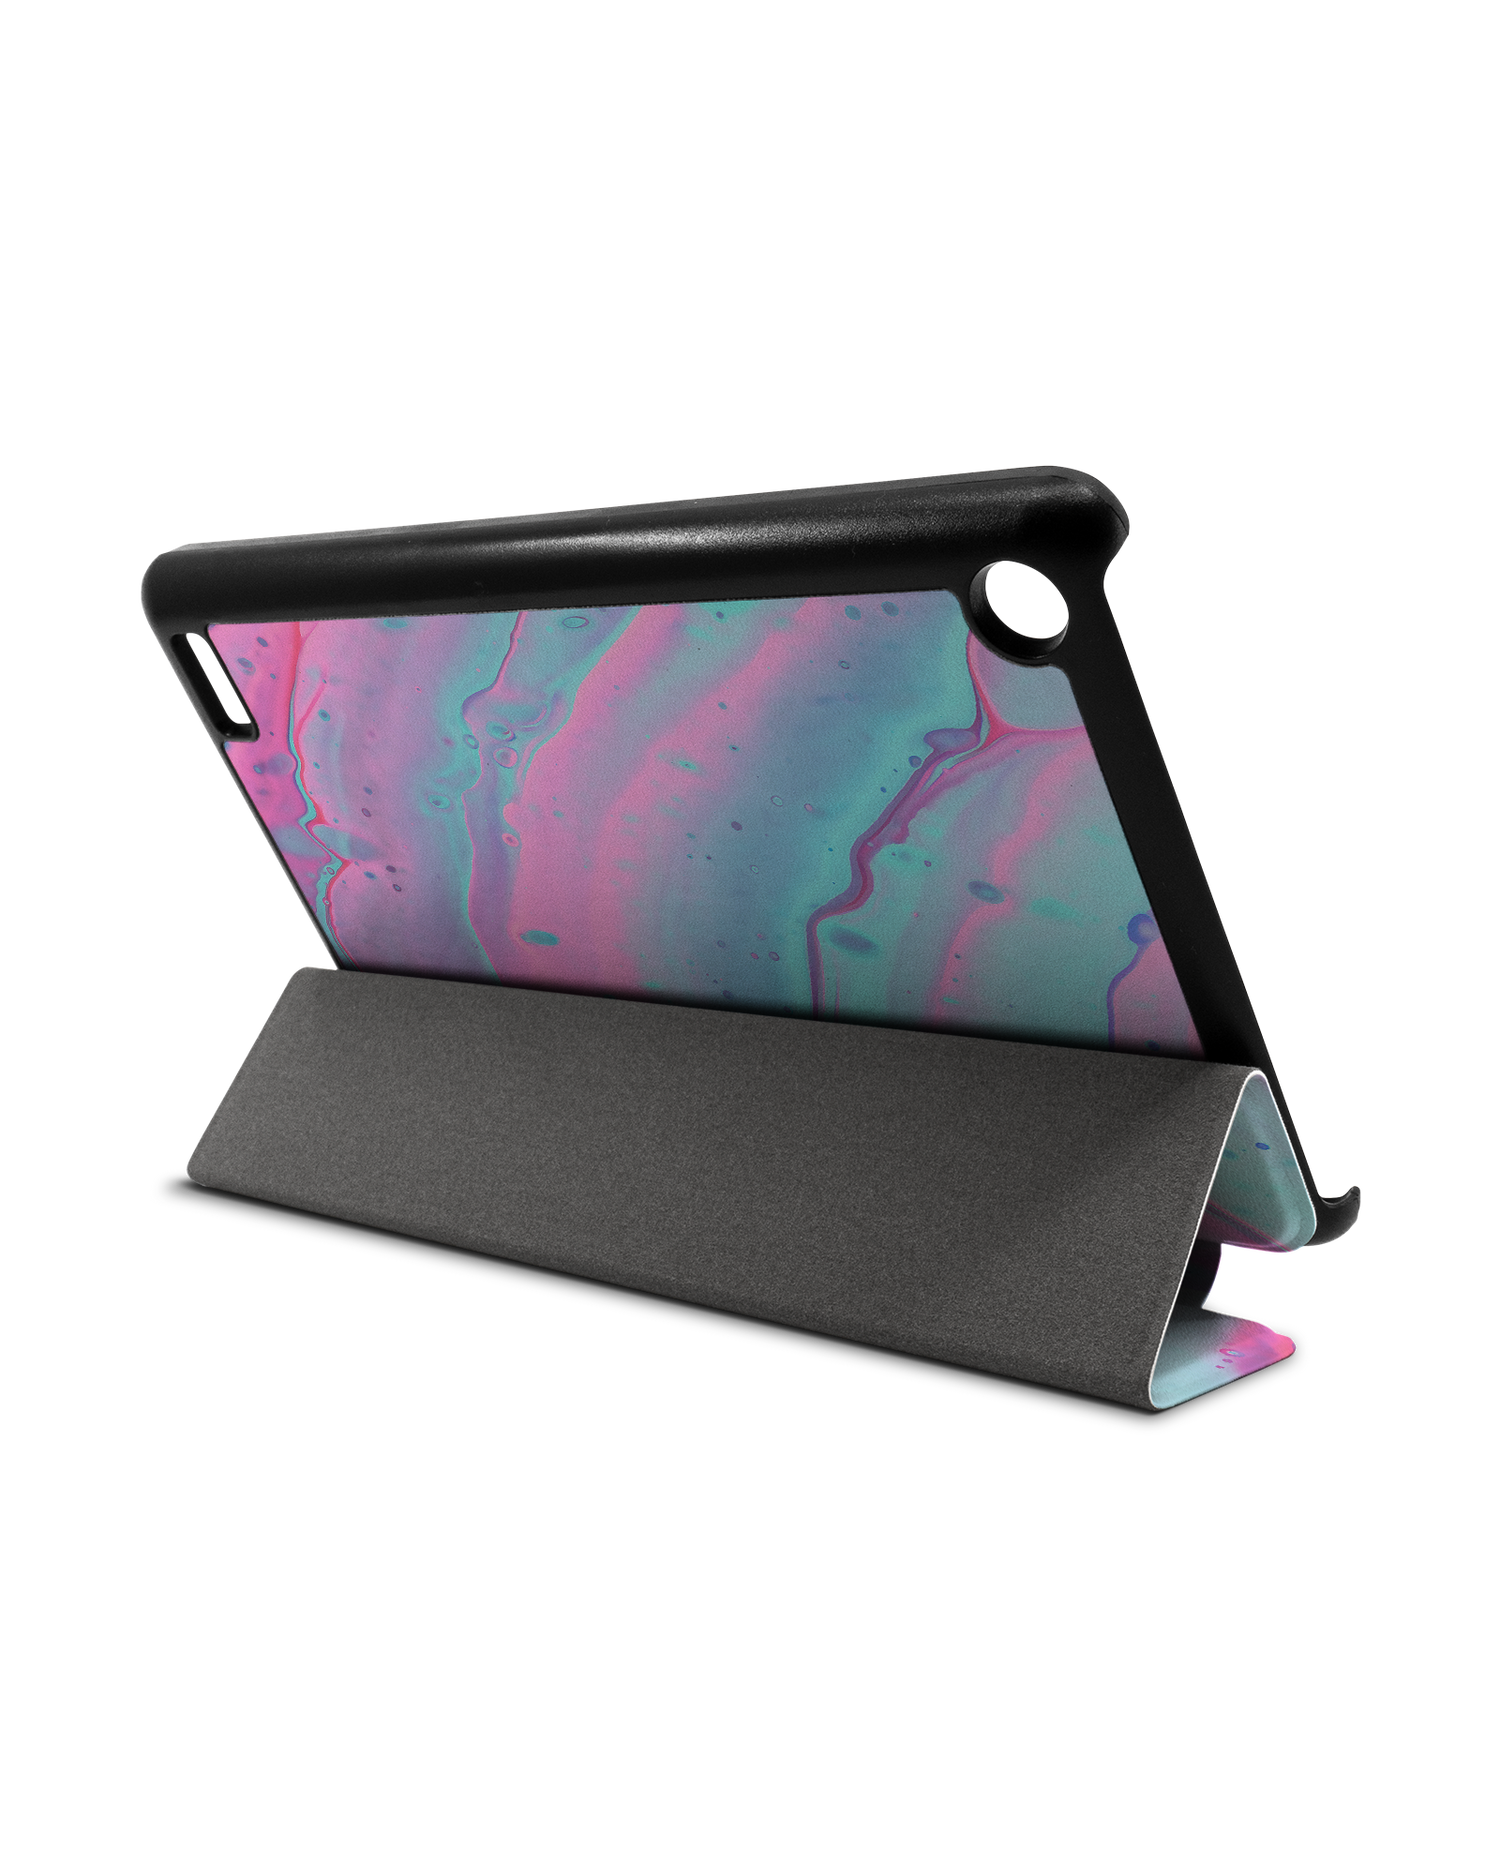 Wavey Tablet Smart Case for Amazon Fire 7: Used as Stand